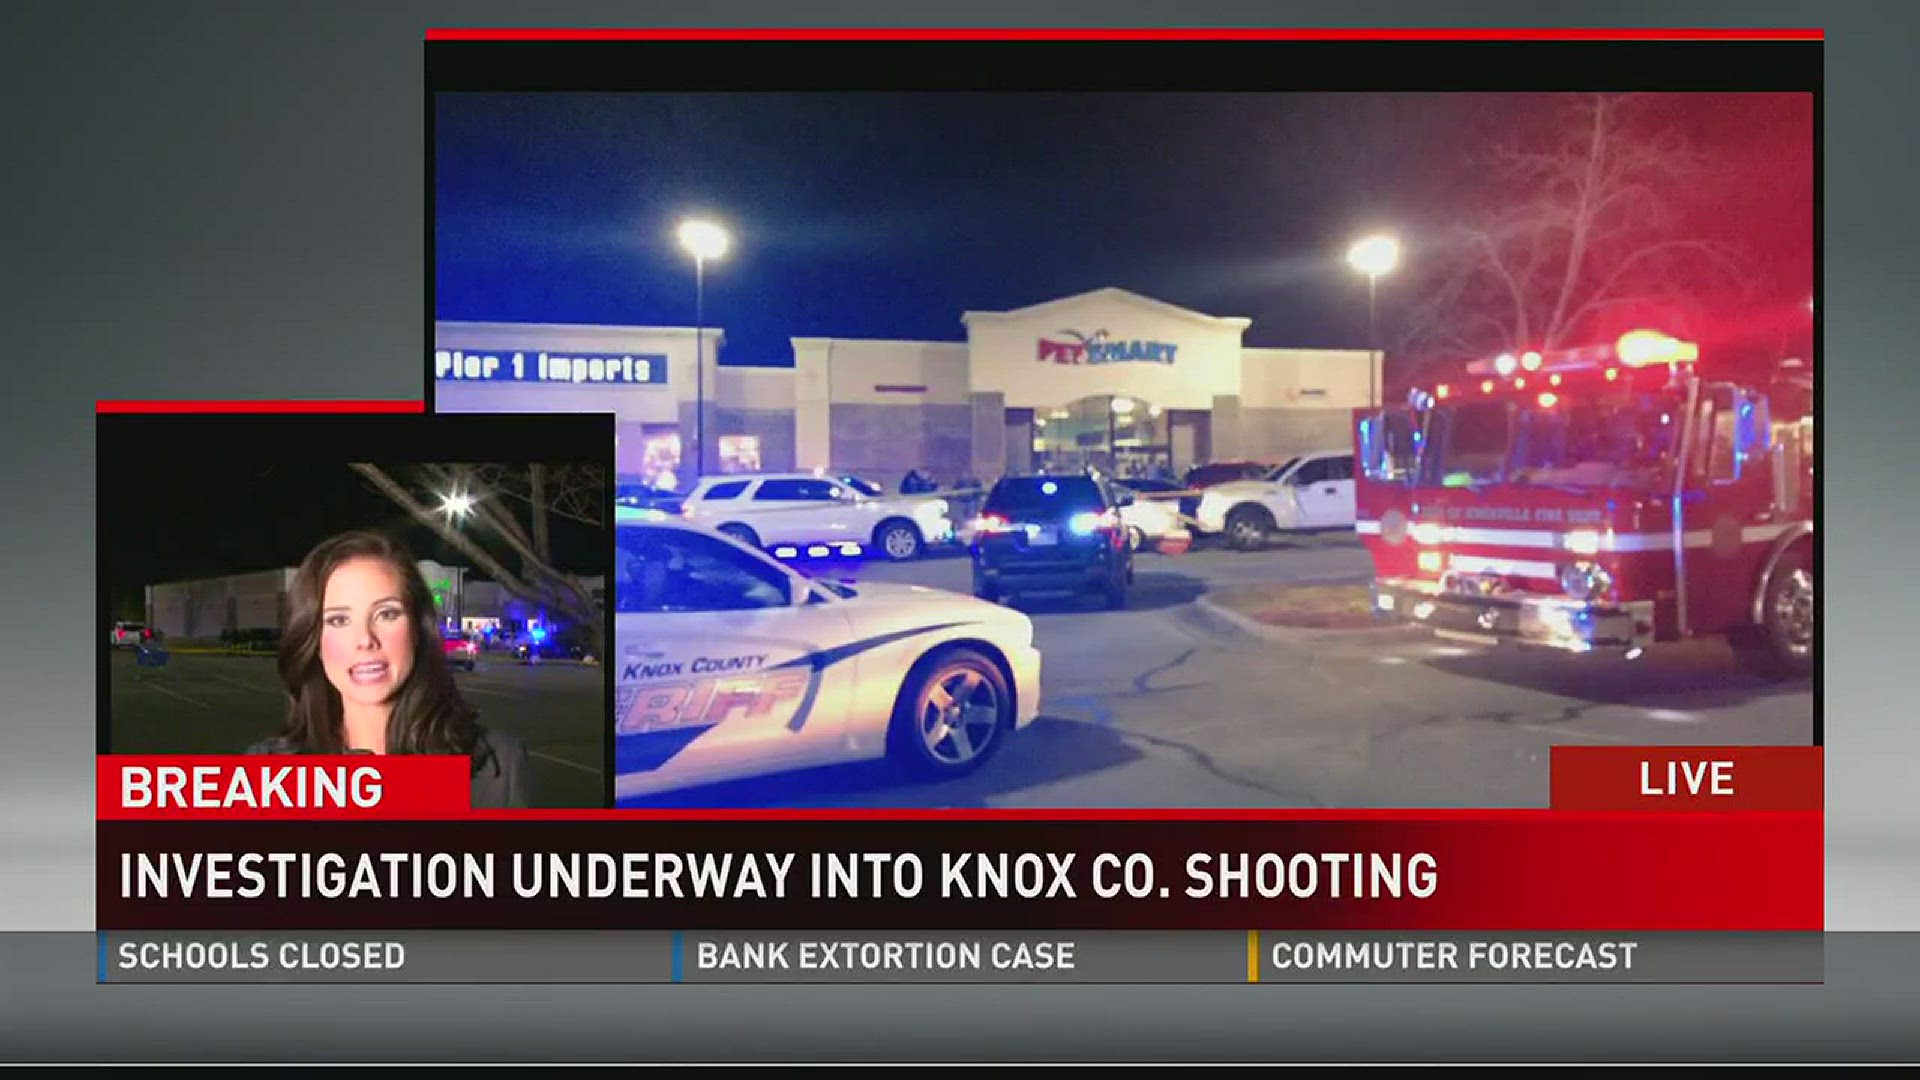 Feb. 13, 2017: Knox County authorities are investigating a disturbance and shooting that occurred about 9 p.m. outside a store in the Turkey Creek shopping center.